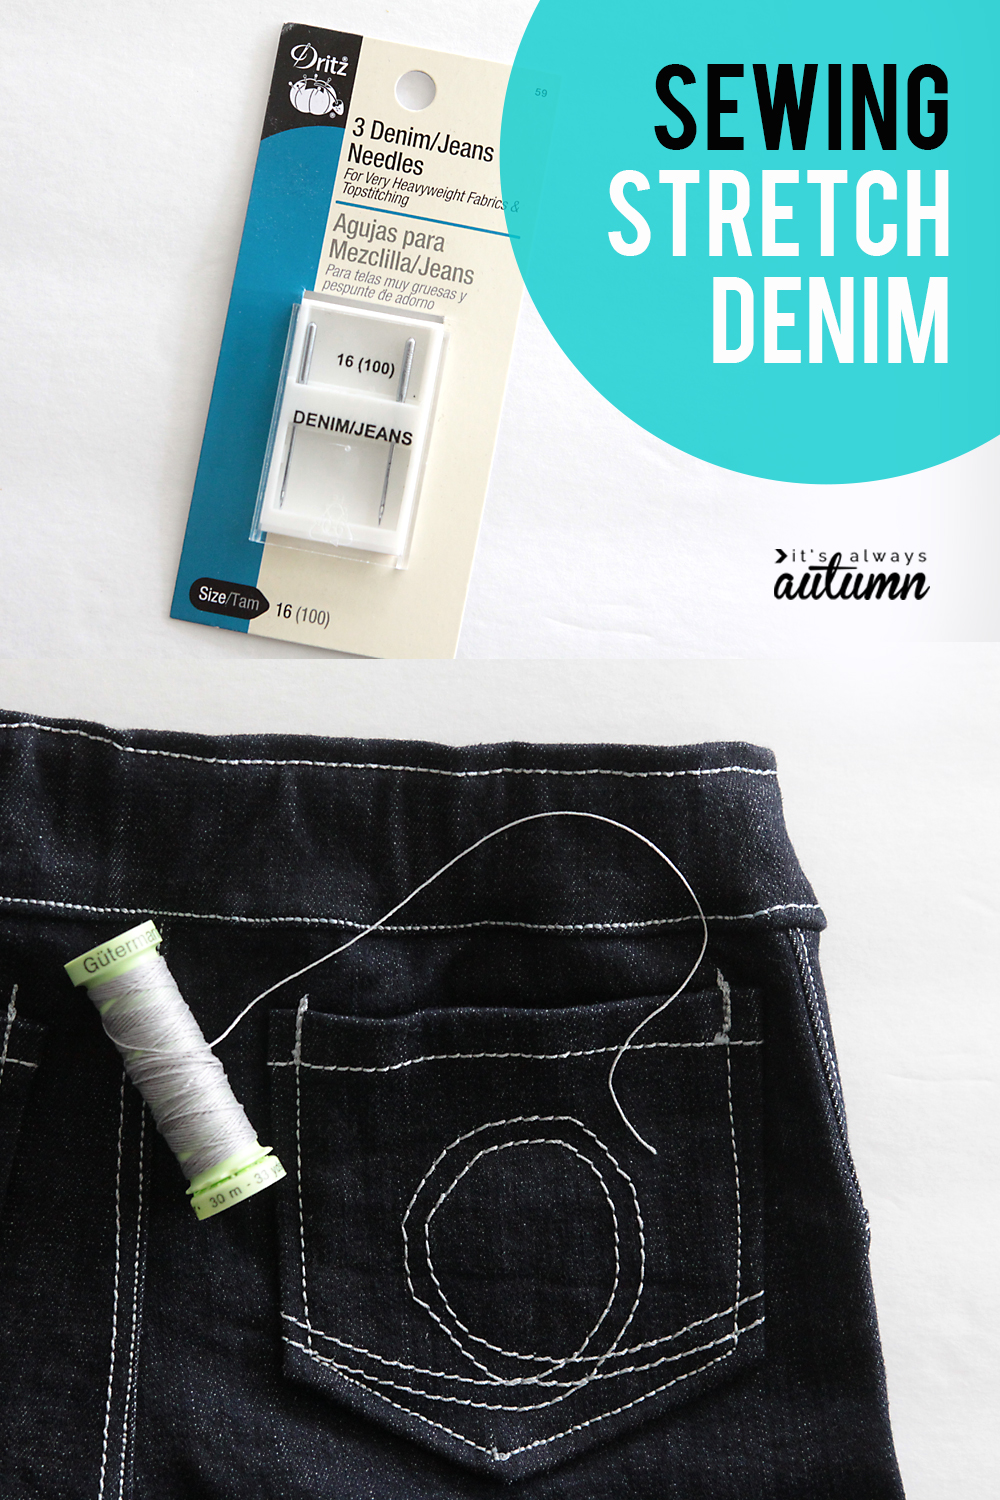 Sewing threads for denim and jeans